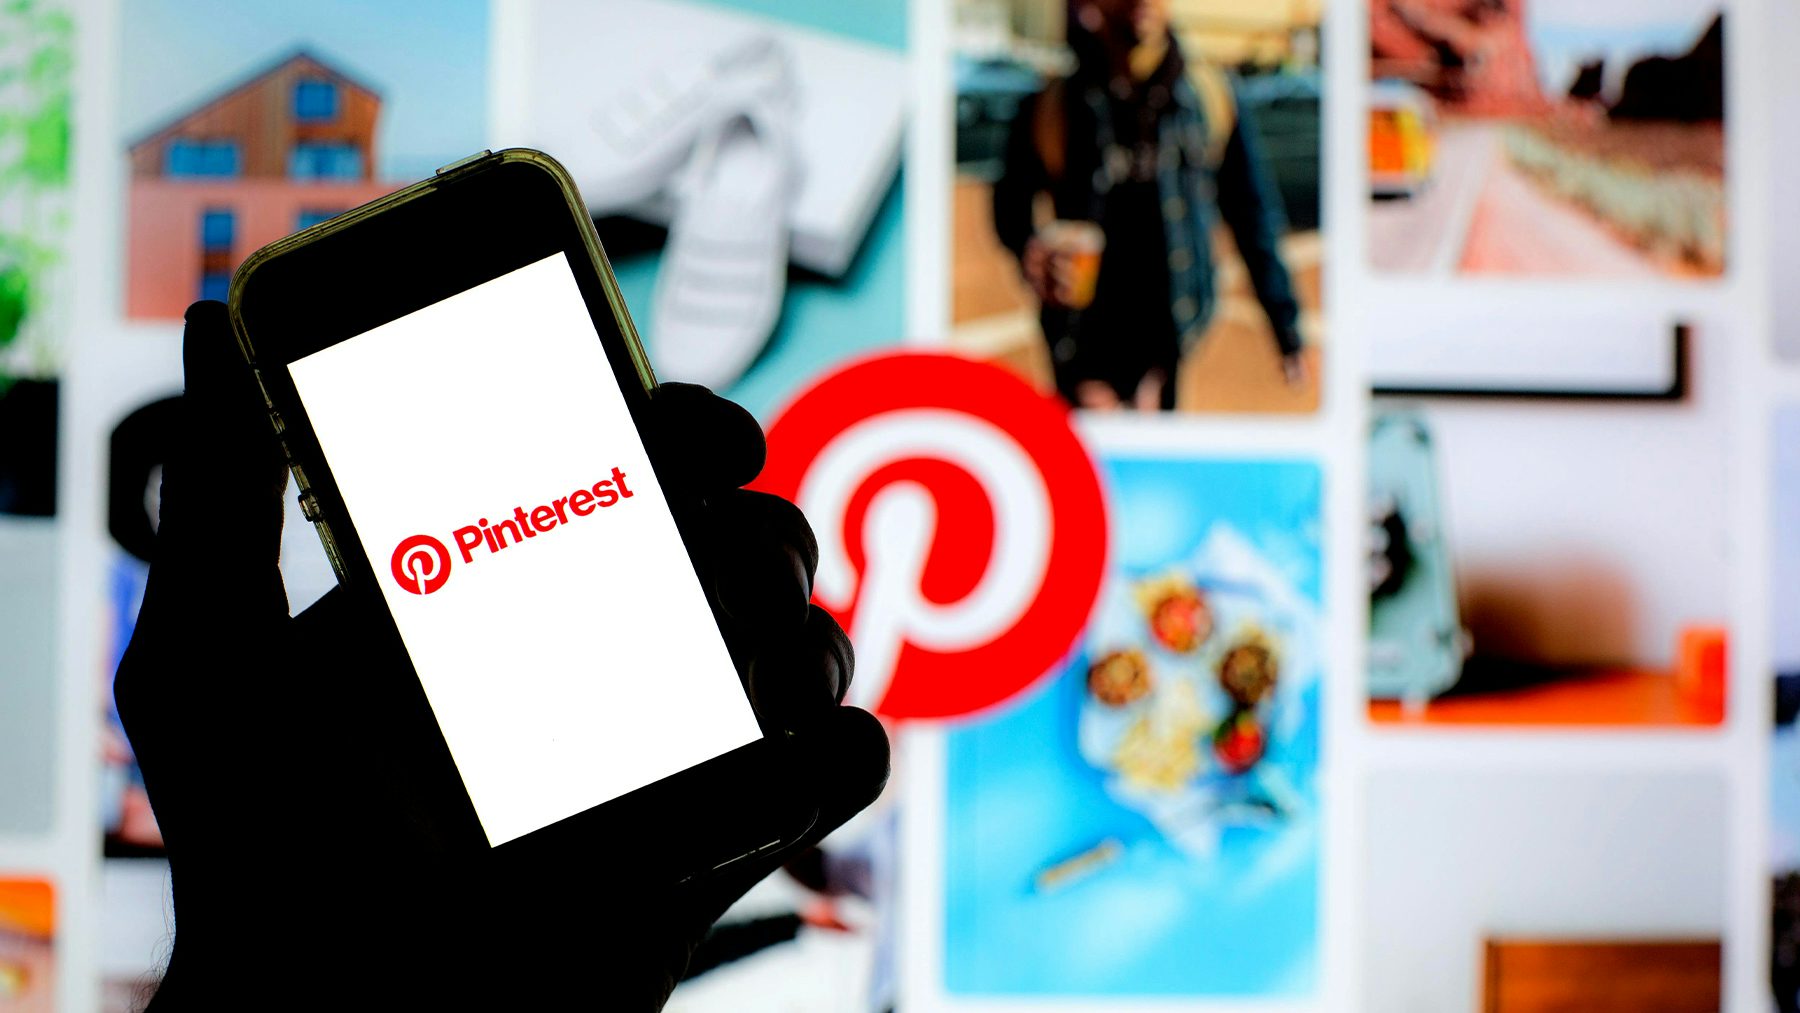 PayPal is exploring a purchase of Pinterest. Getty Images.